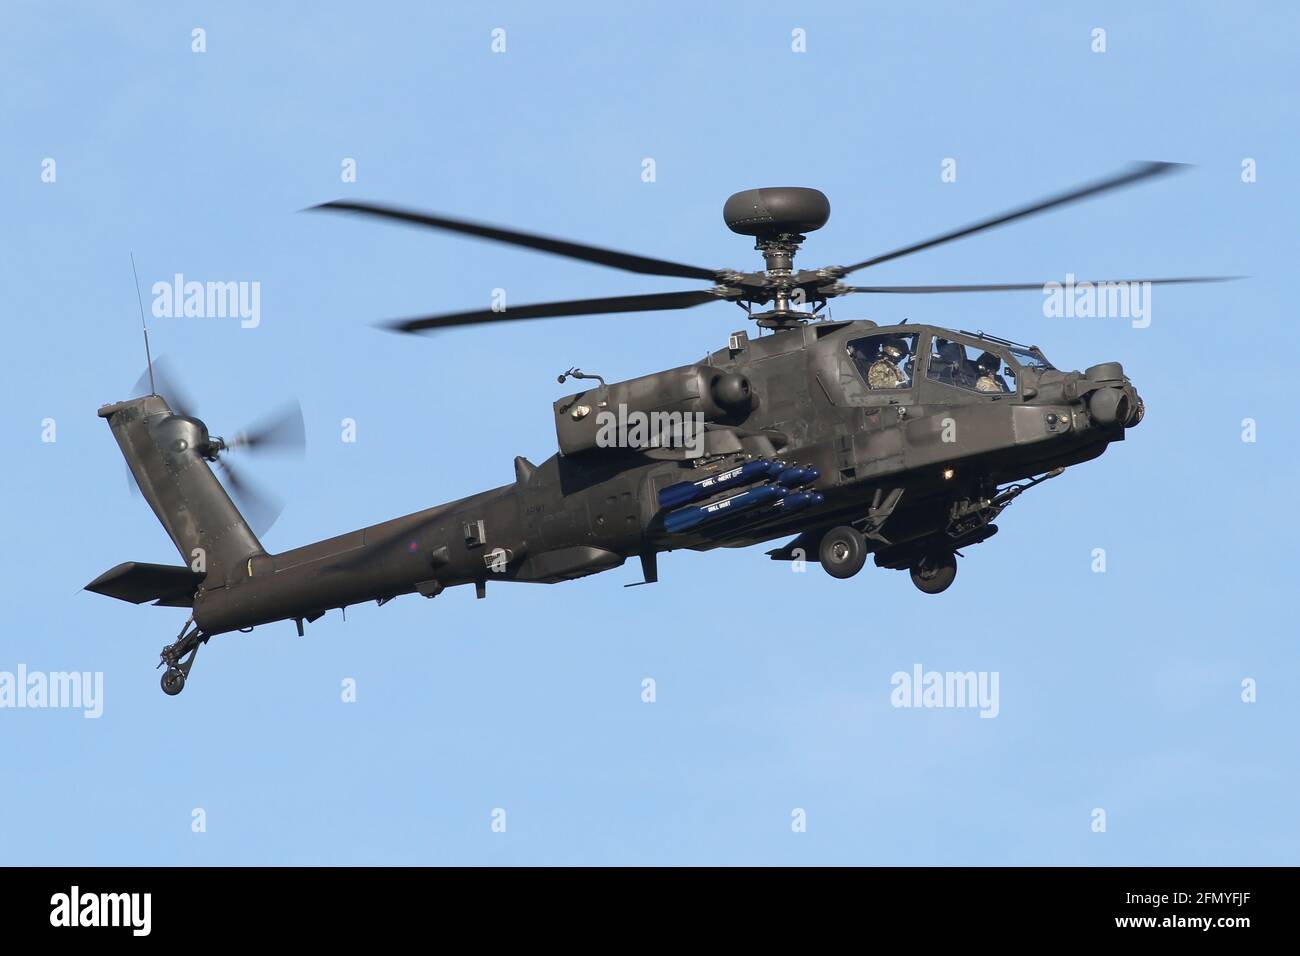 Army Air Corps Apache helicopter landing at Wattisham airfield in Suffolk. Stock Photo